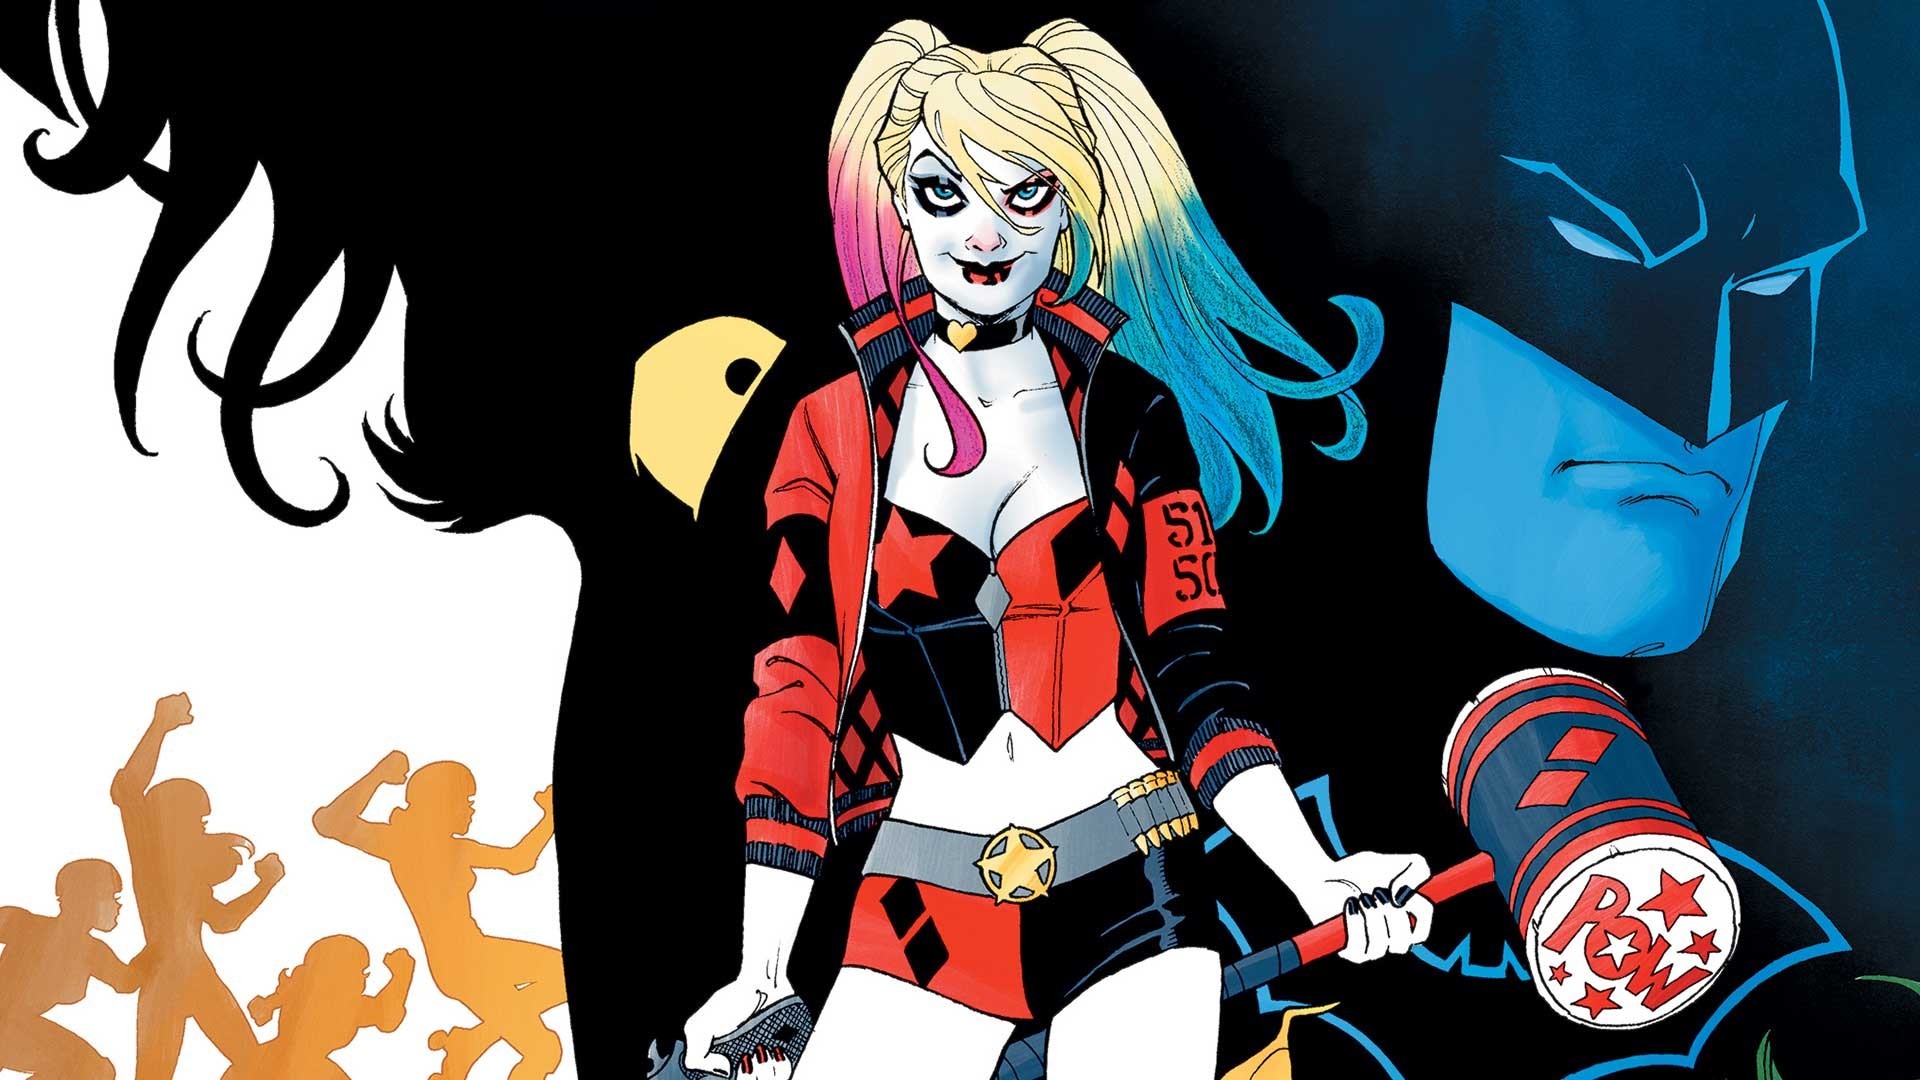 Pictures Of Harley Quinn Wallpaper Hd With Image Resolution - Harley Quinn Comic 2016 - HD Wallpaper 